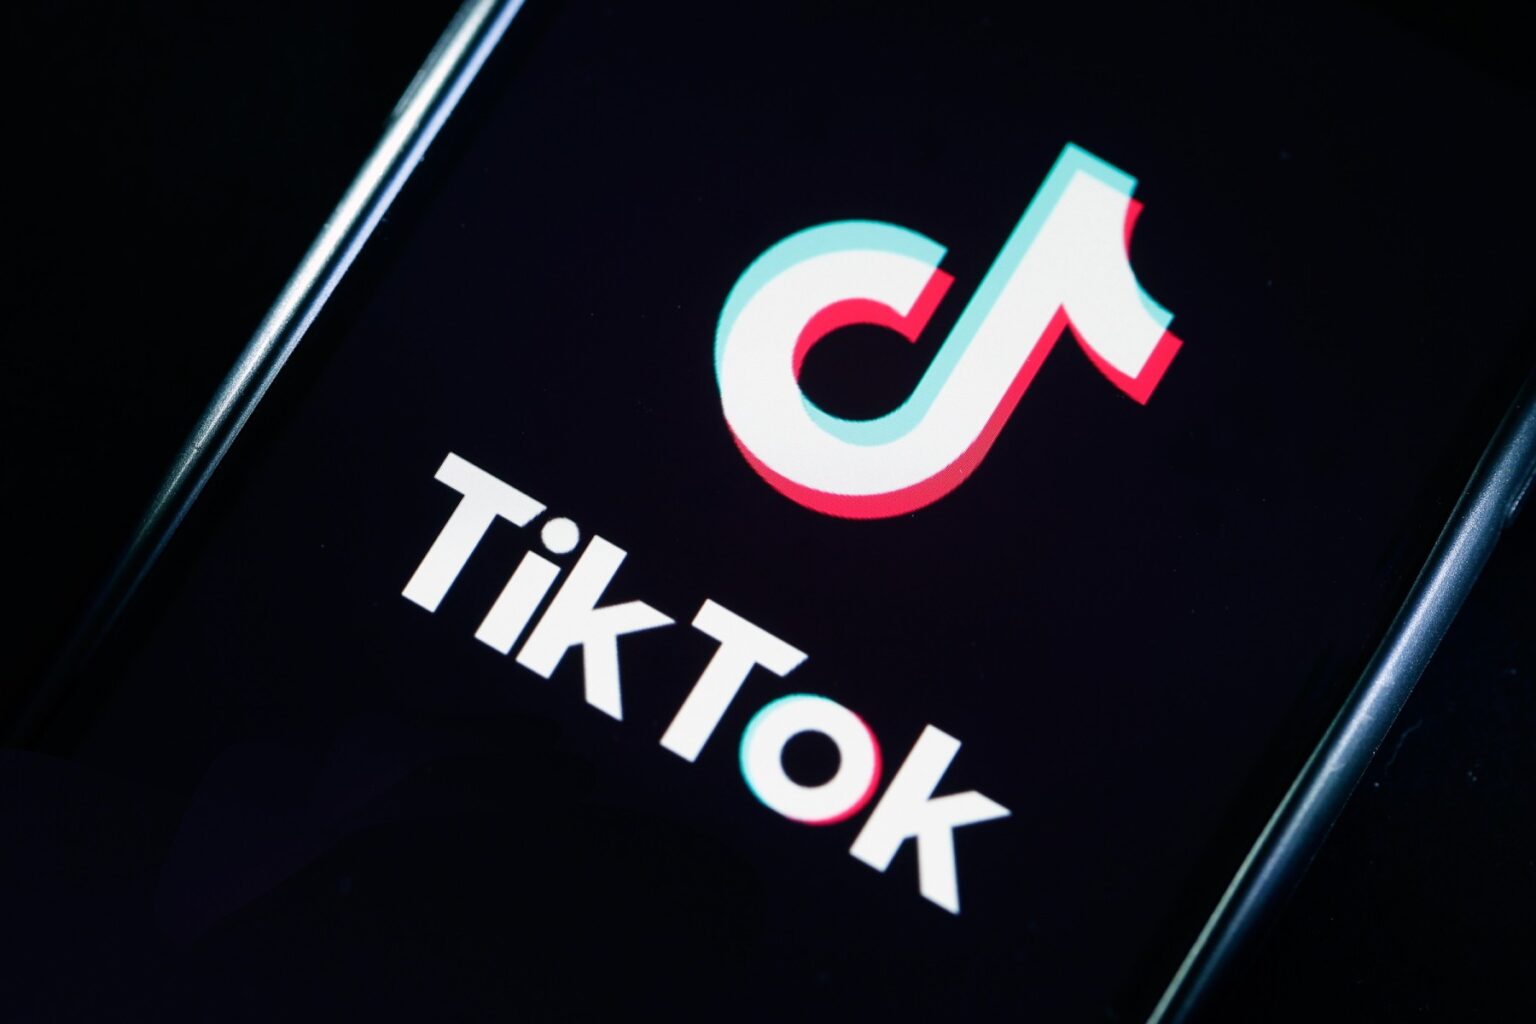 TikTok is bigger than ever. Find out how to use the social media platform to bolster you career as an artist.